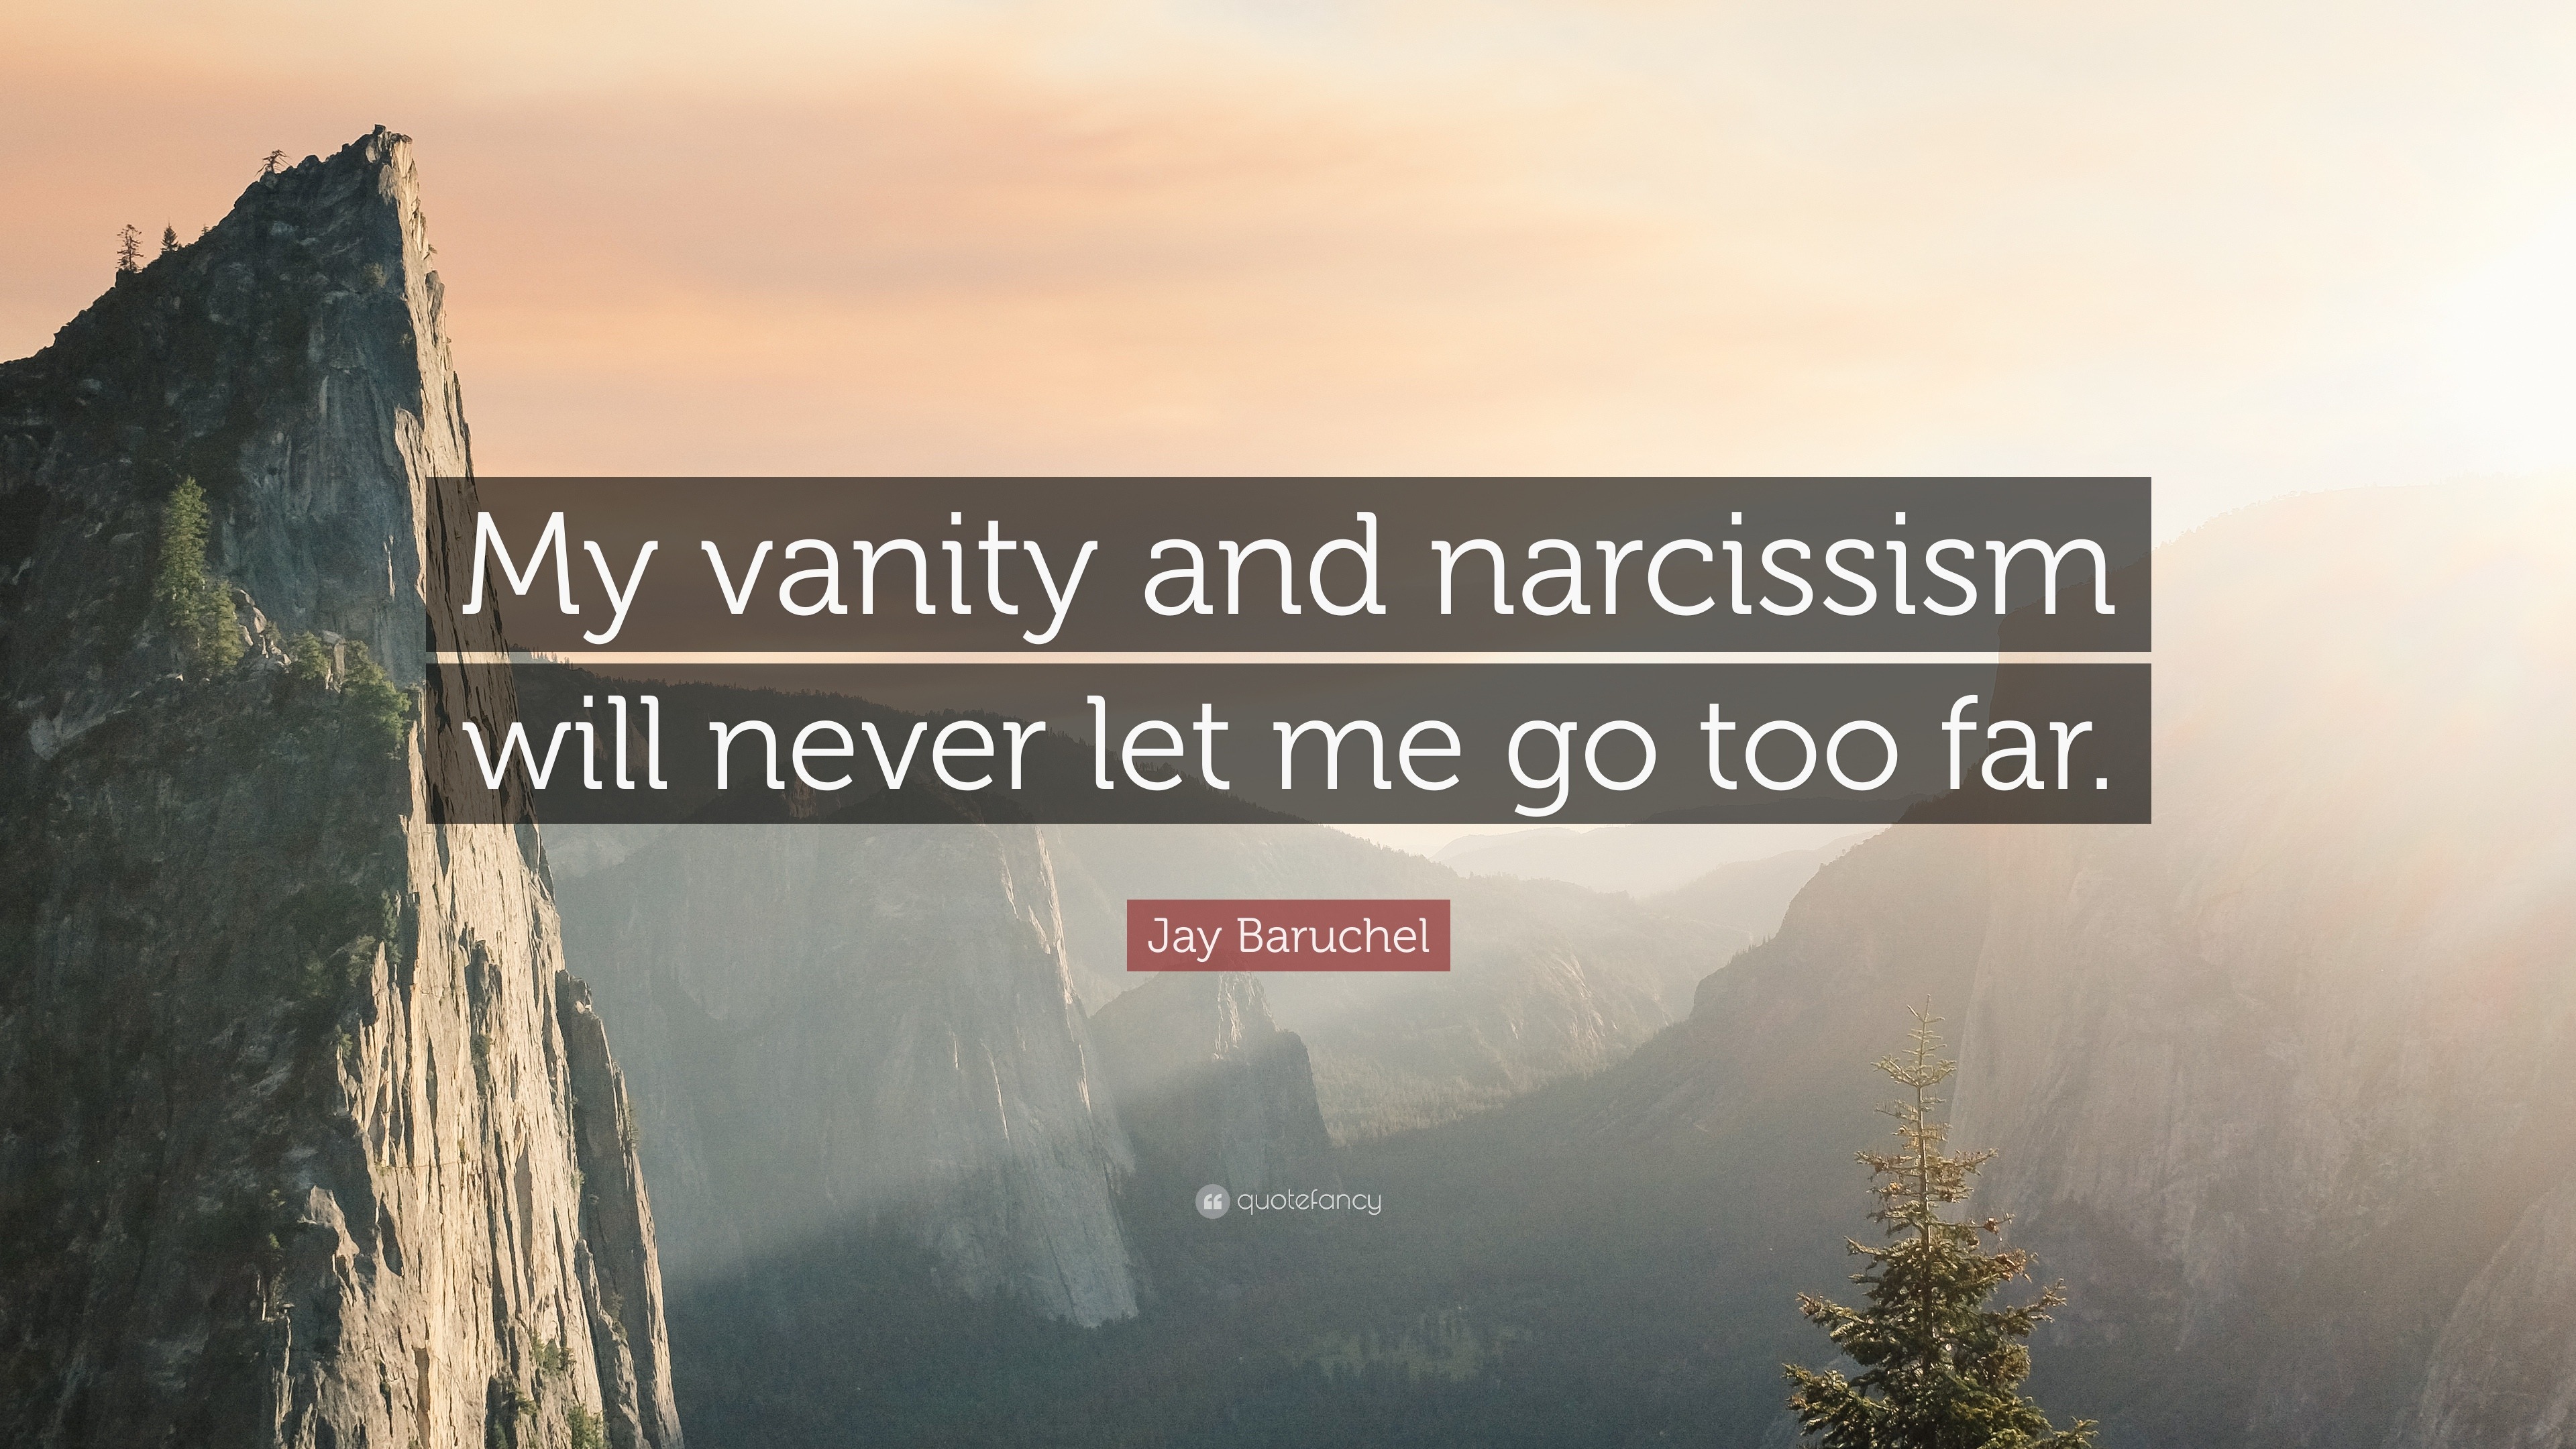 Jay Baruchel Quote: "My vanity and narcissism will never ...